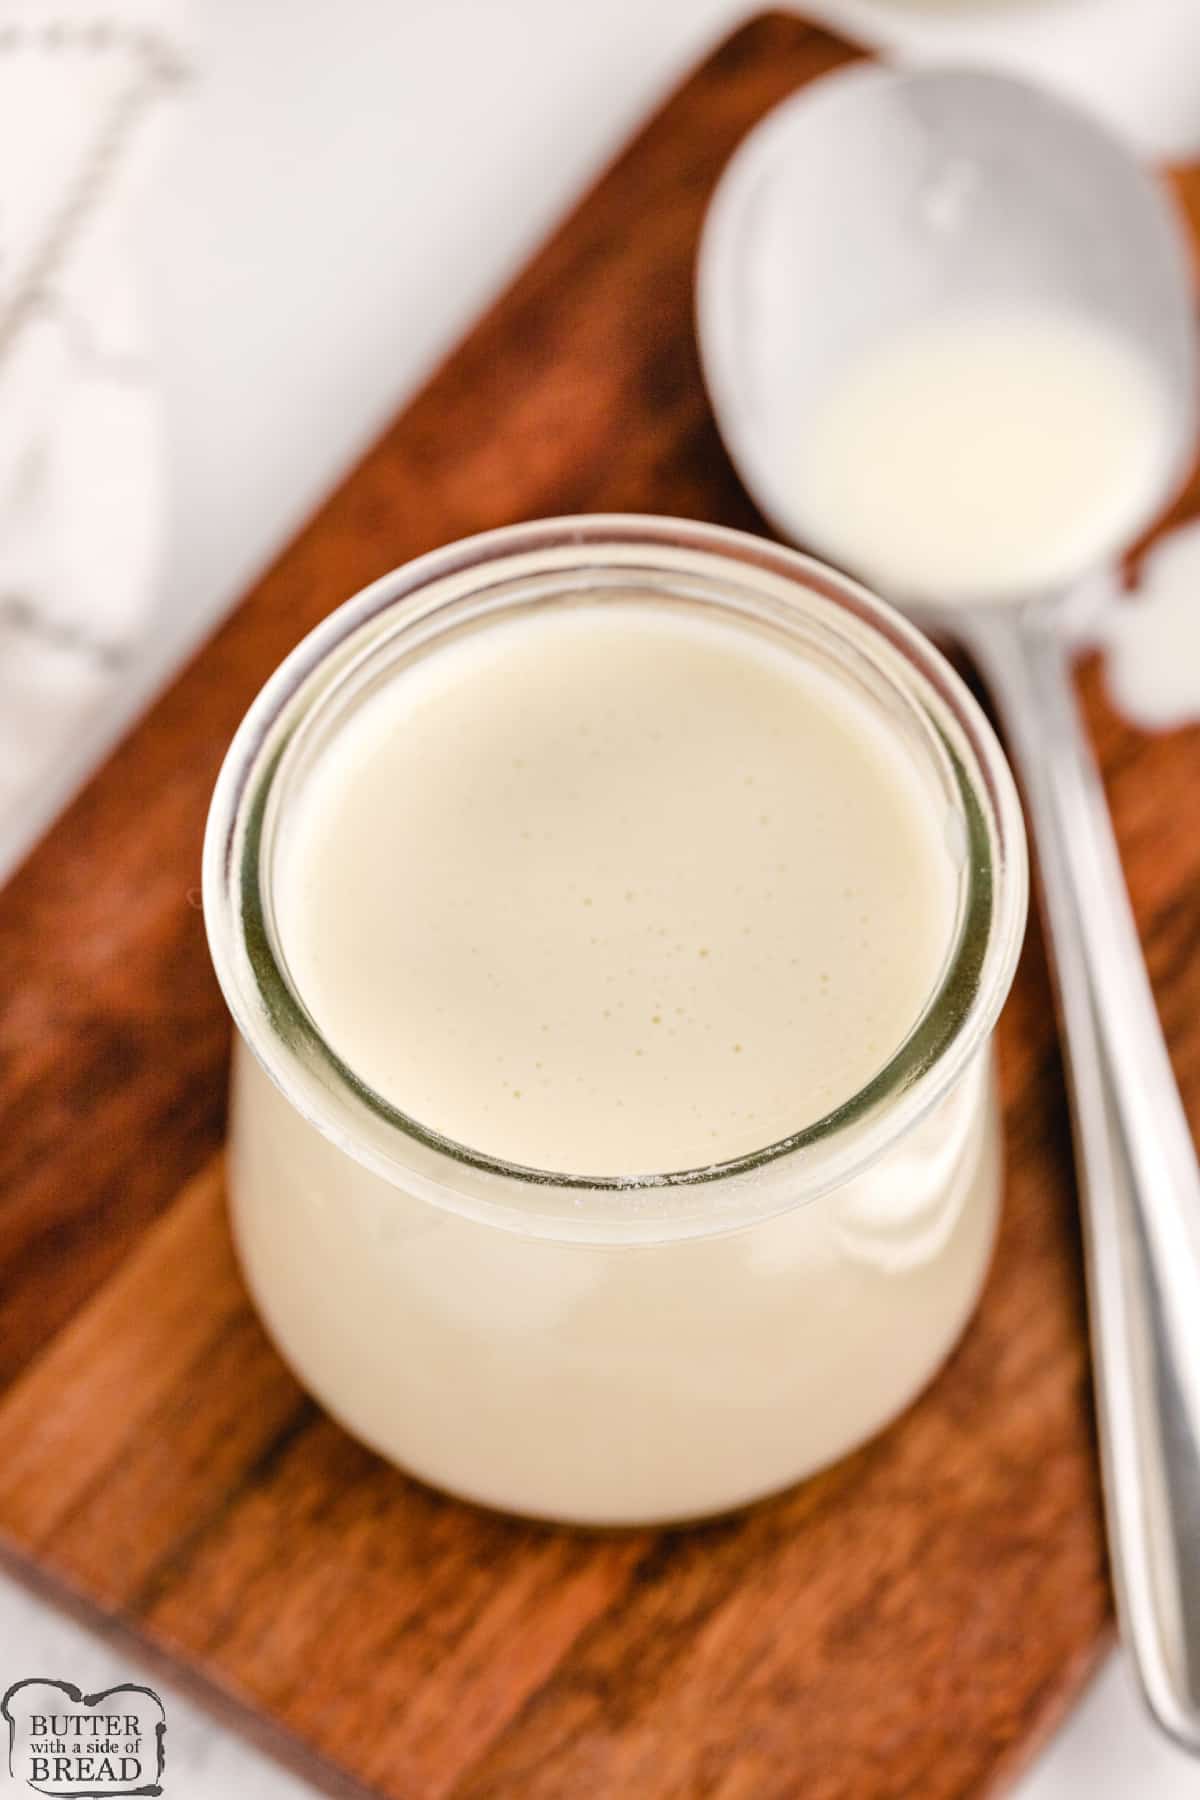 Homemade sweetened condensed milk is made with only 4 simple ingredients in just a few minutes. It is so quick and easy to make this homemade version of a pantry staple. 